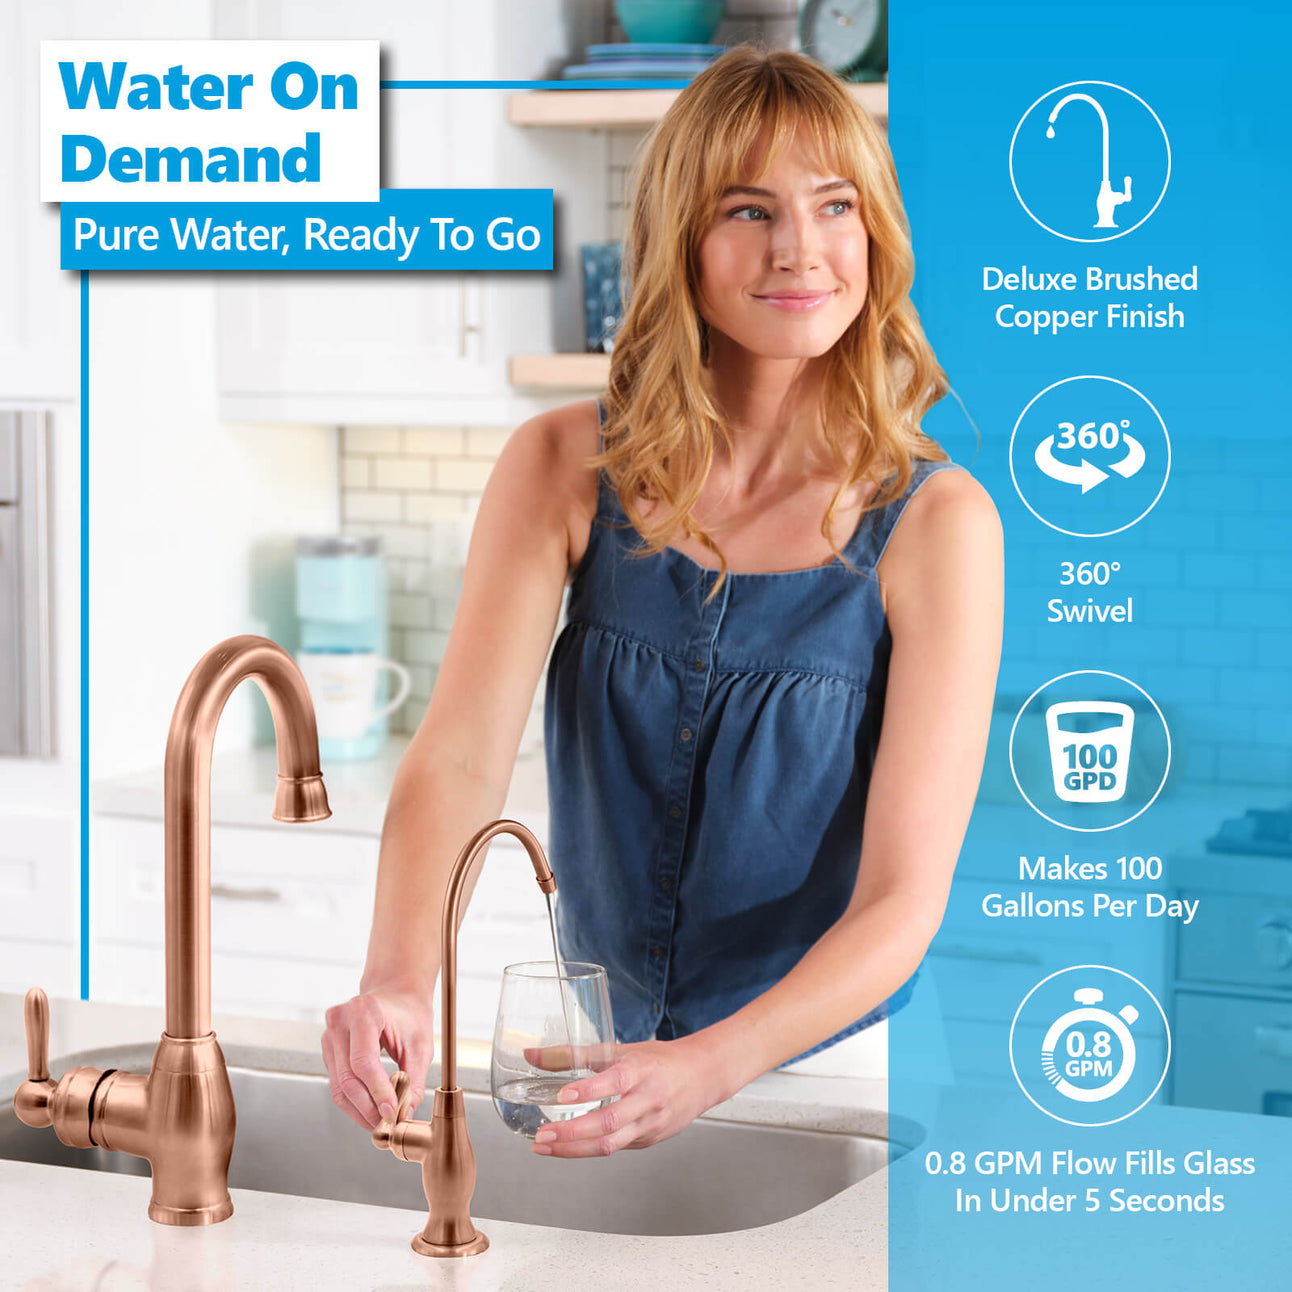 Deionization RO System with deluxe brushed copper faucet